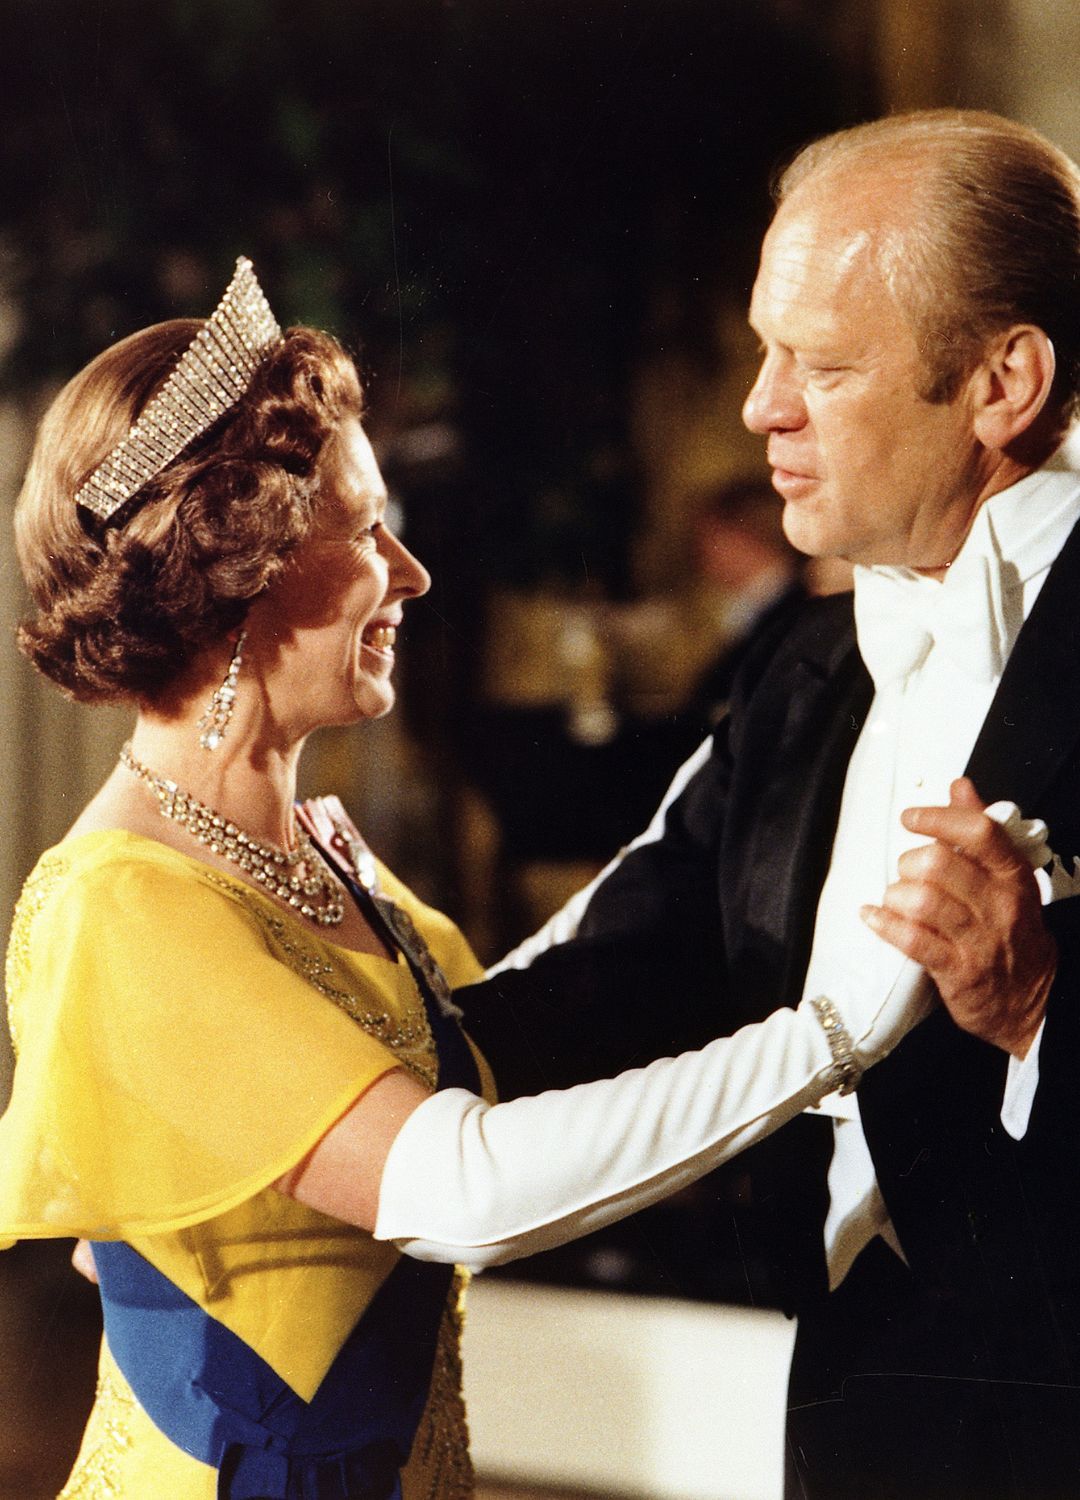 <p>                     Dancing with the 38th President of the United States, Gerald Rudolph Ford Jr. called for a particularly magnificent tiara, and Queen Elizabeth II delivered just that. Whilst attending a ball at the White House during the 1976 Bicentennial Celebrations of the Declaration of Independence, Her Majesty wore the Queen Alexandra Kokoshnik Tiara which looked decadent with her buttercup yellow dress and white evening gloves.                   </p>